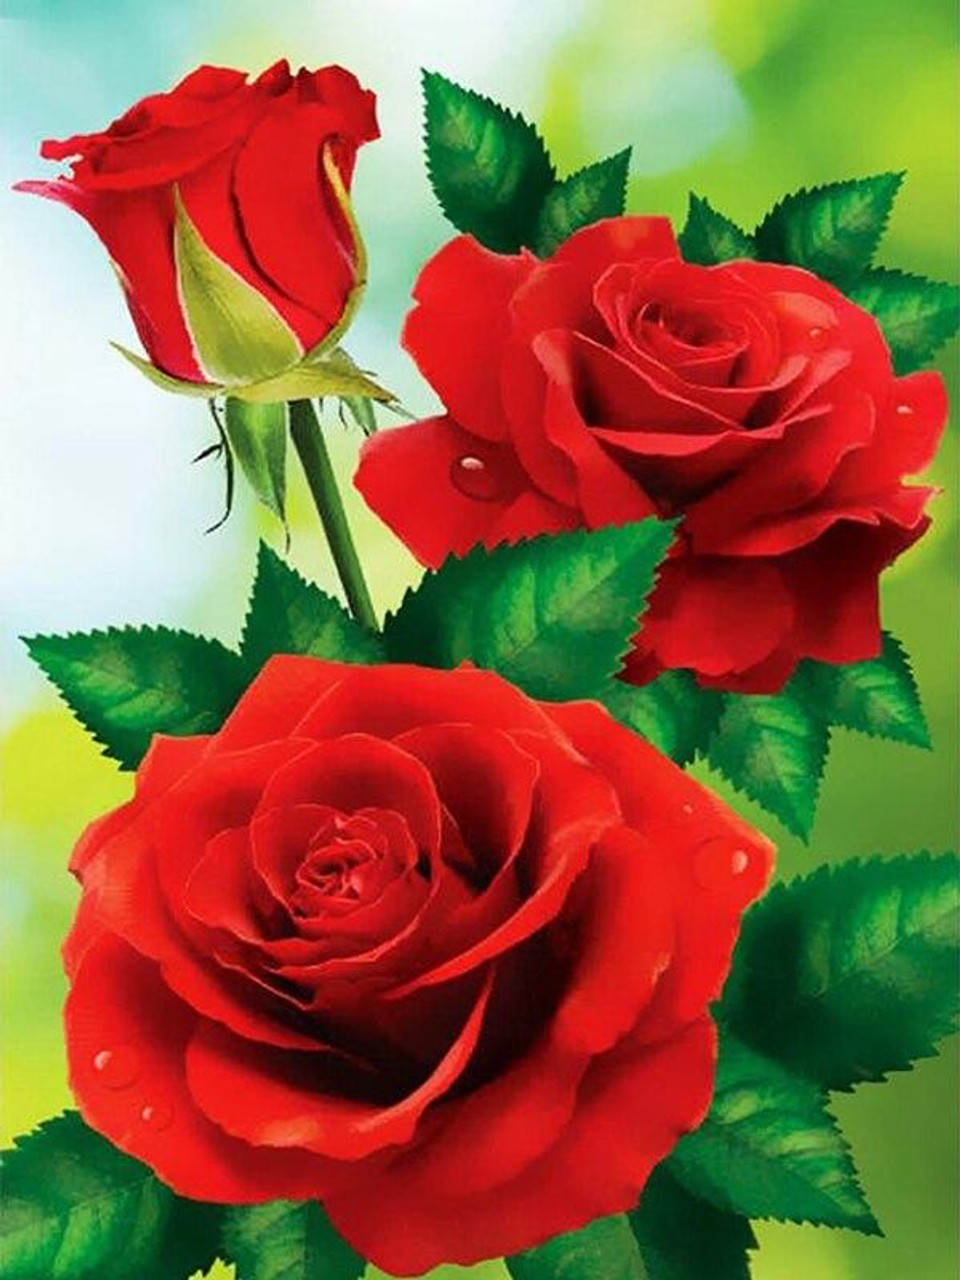 Best Deal for 5D Diamond Painting Beautiful Rose,Diamond Painting Kits